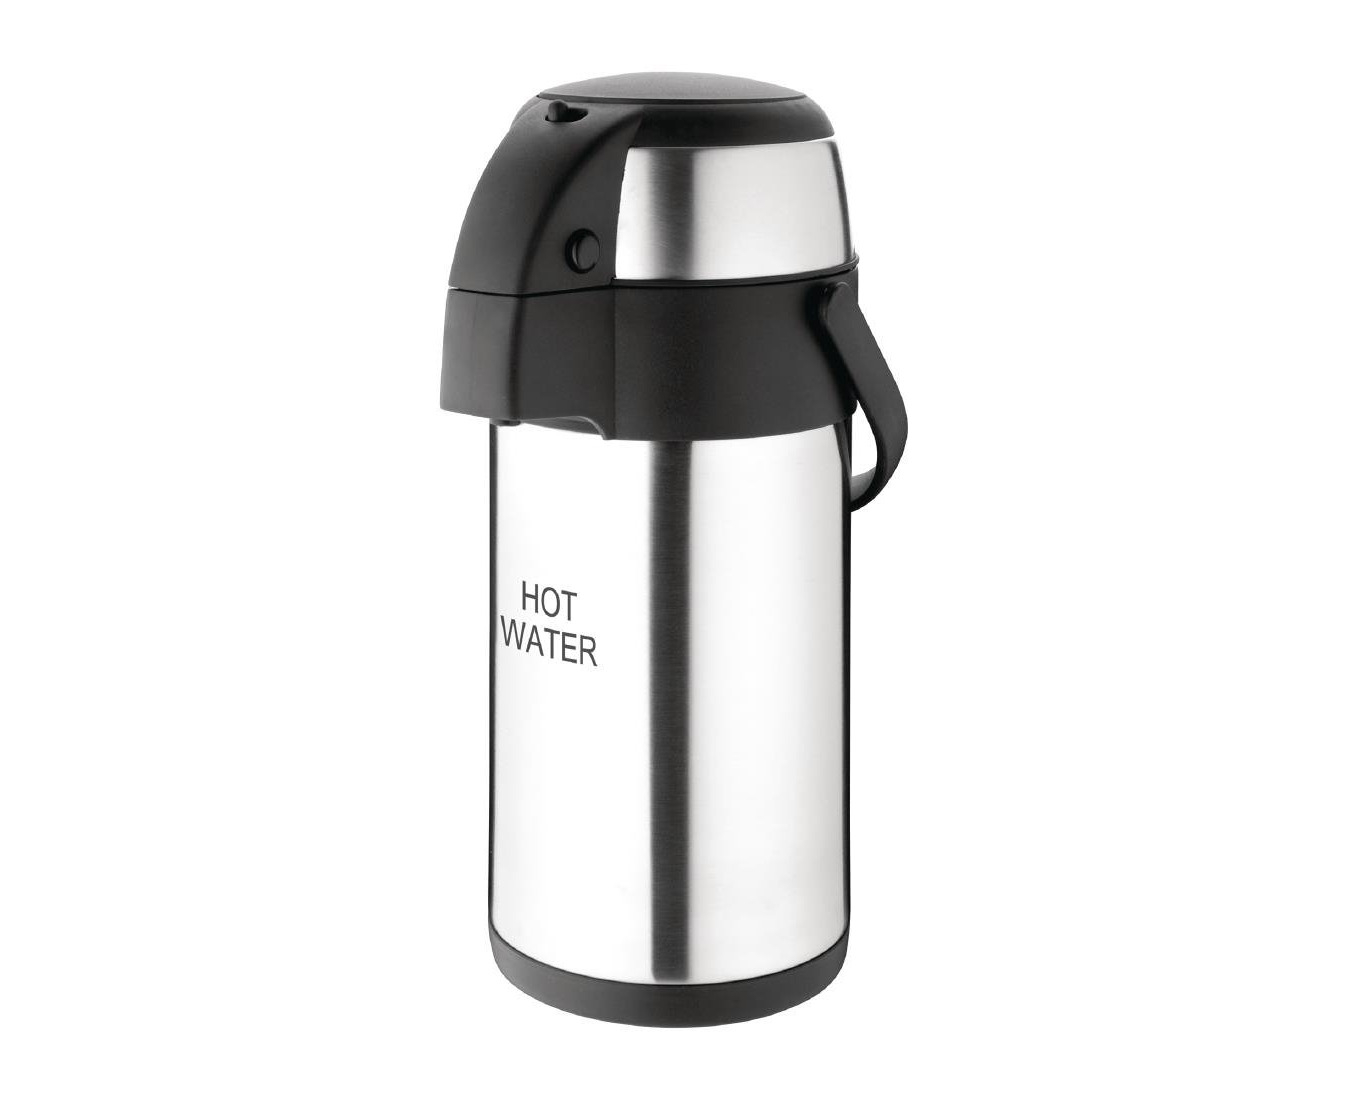 Stainless Steel AIR Pot Flask Tea Coffee Pump Action Vacuum Thermos 3 LTR Flask 